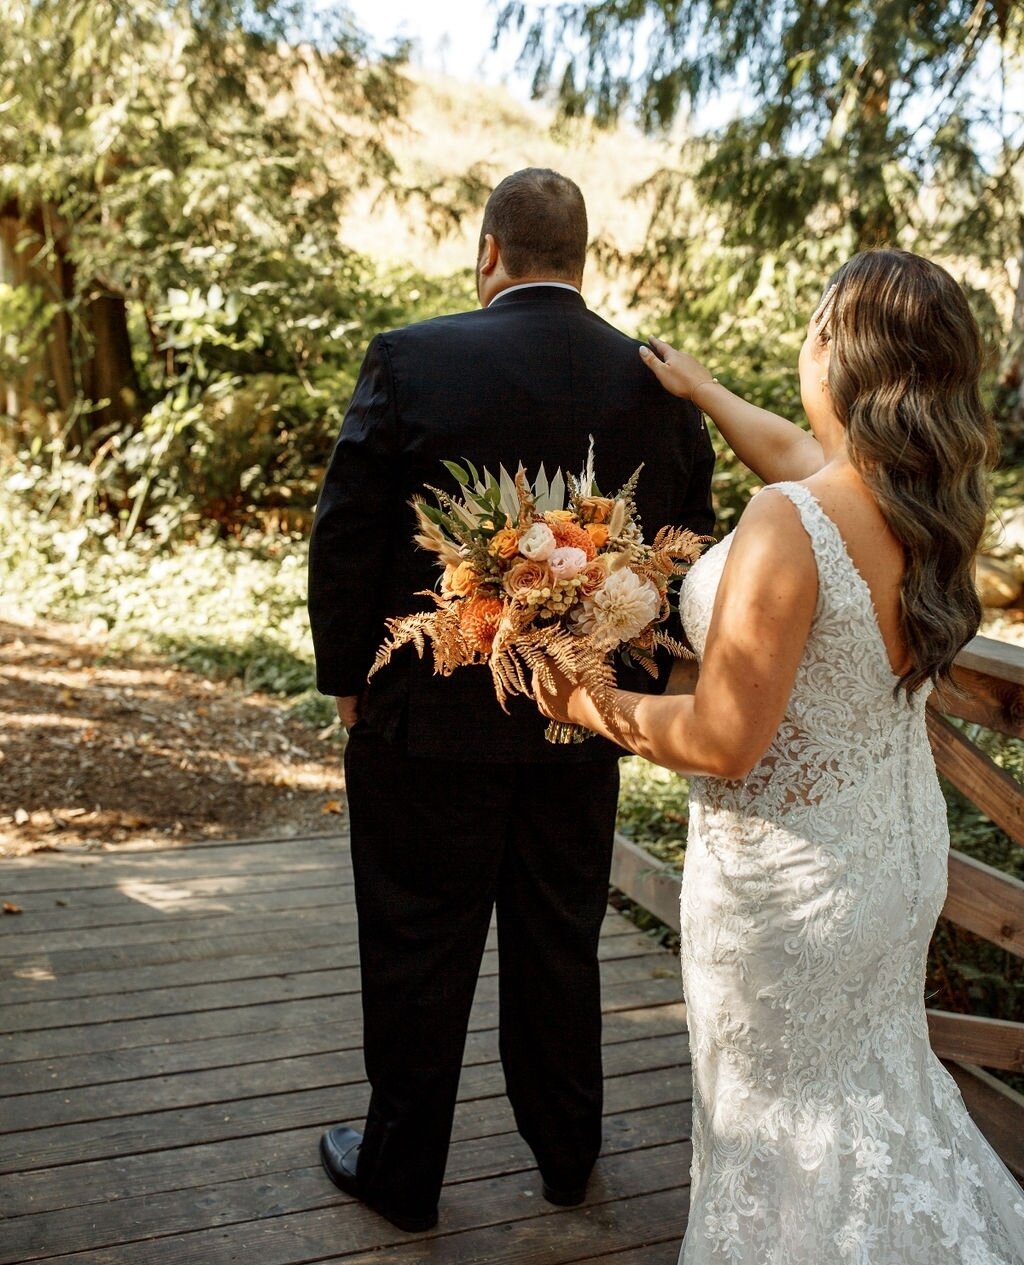 FAVORITE FRIDAY⁠
⁠
On Fridays I take some time to look back on favorite moments captured in film from past weddings I've coordinated.⁠
⁠
K&amp;J's September wedding was such a fun day! It was unseasonably warm and sunny for late September, and the go